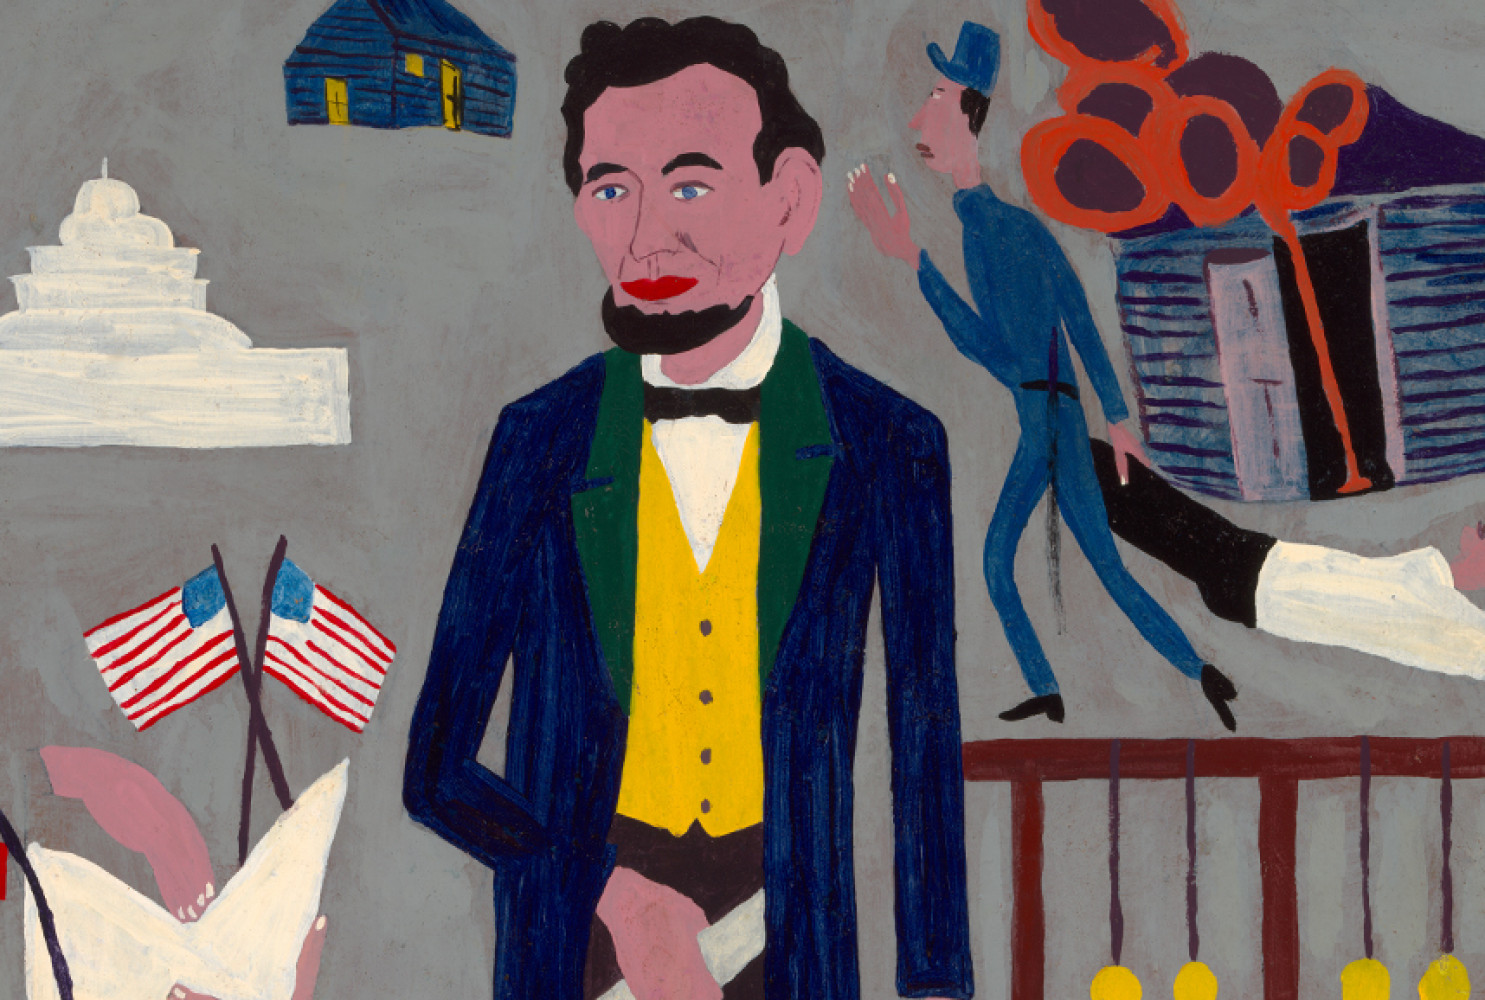 Abraham Lincoln (detail), ca. 1945, by William H. Johnson (American, 1901-1972). Oil on paperboard, 36 1/4 x 33 3/8 inches. Image courtesy of Smithsonian American Art Museum.